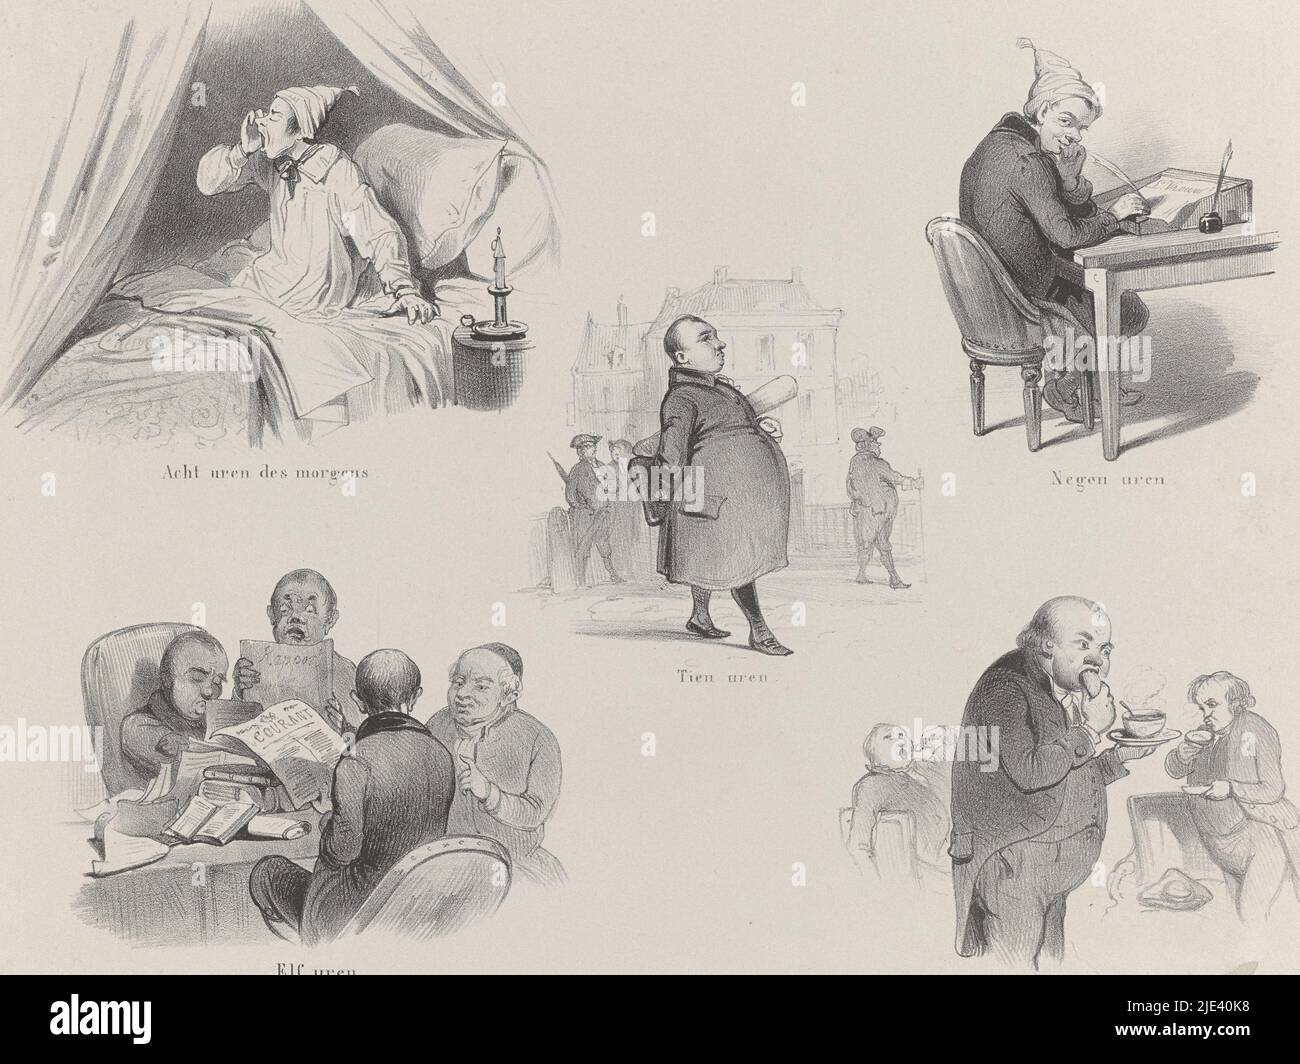 Work of the delegates in the morning at the synod, 1849, anonymous, 1849, Cartoon on the work of the delegates at the synod between eight in the morning and one in the afternoon. Sleeping out, corresponding, walking, reading newspapers, having lunch. Loose print in the cover with two other cartoons and a text sheet about the meeting of the General Synod of the Reformed Church at Amsterdam on July 4, 1849., print maker: anonymous, publisher: Johan Noman & Zoon, print maker: Netherlands, publisher: Zaltbommel, 1849, paper, h 230 mm × w 311 mm Stock Photo